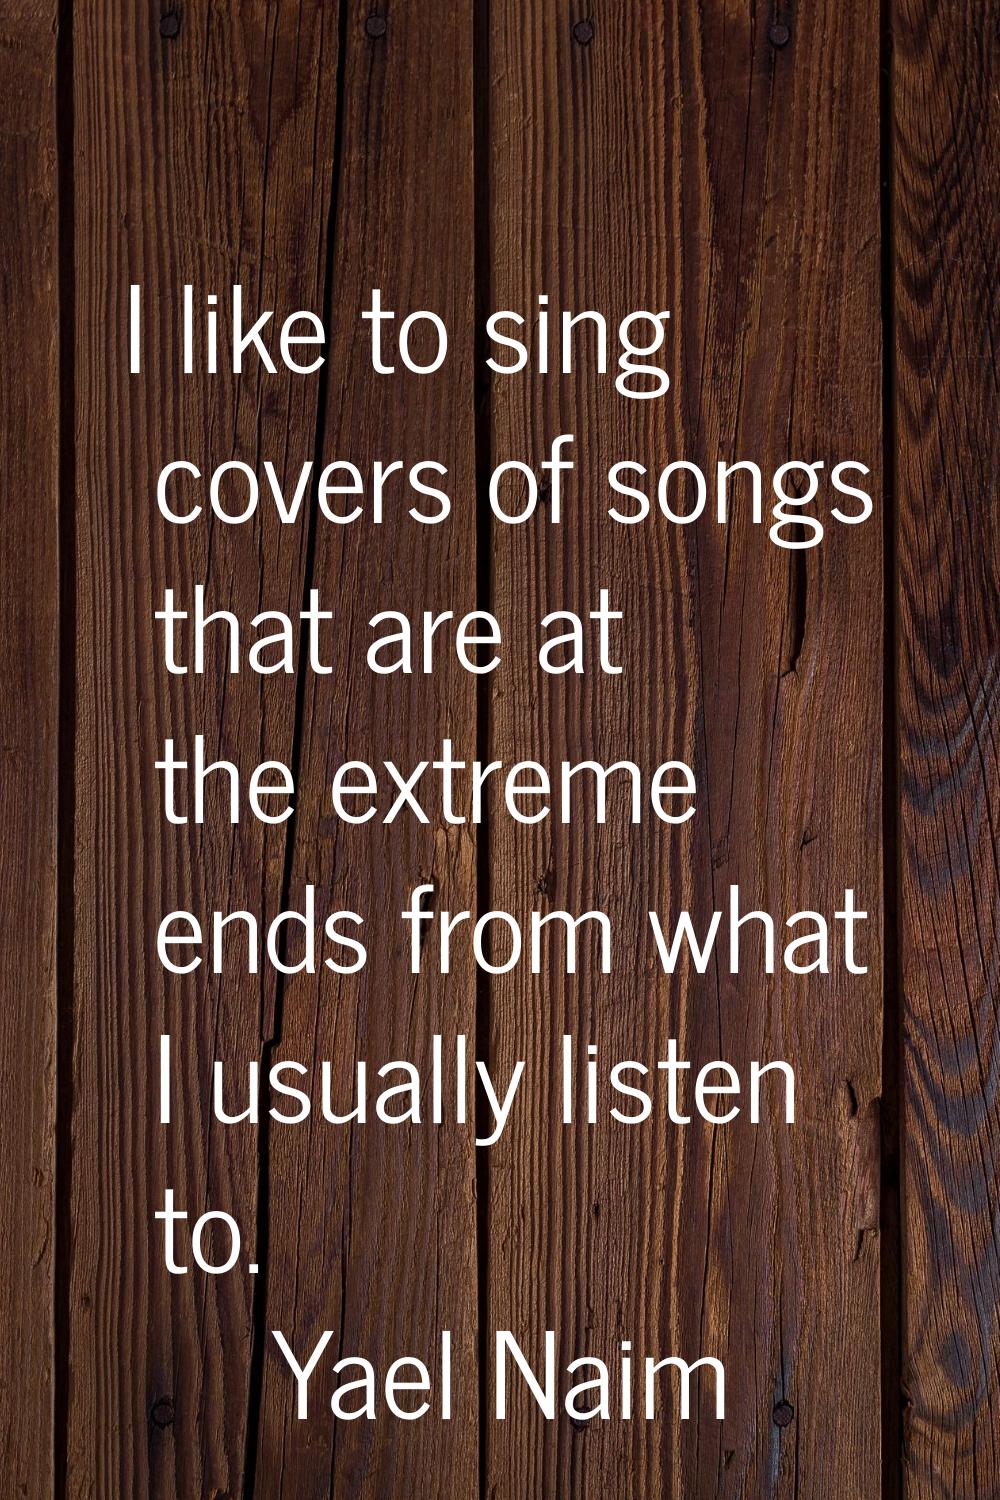 I like to sing covers of songs that are at the extreme ends from what I usually listen to.